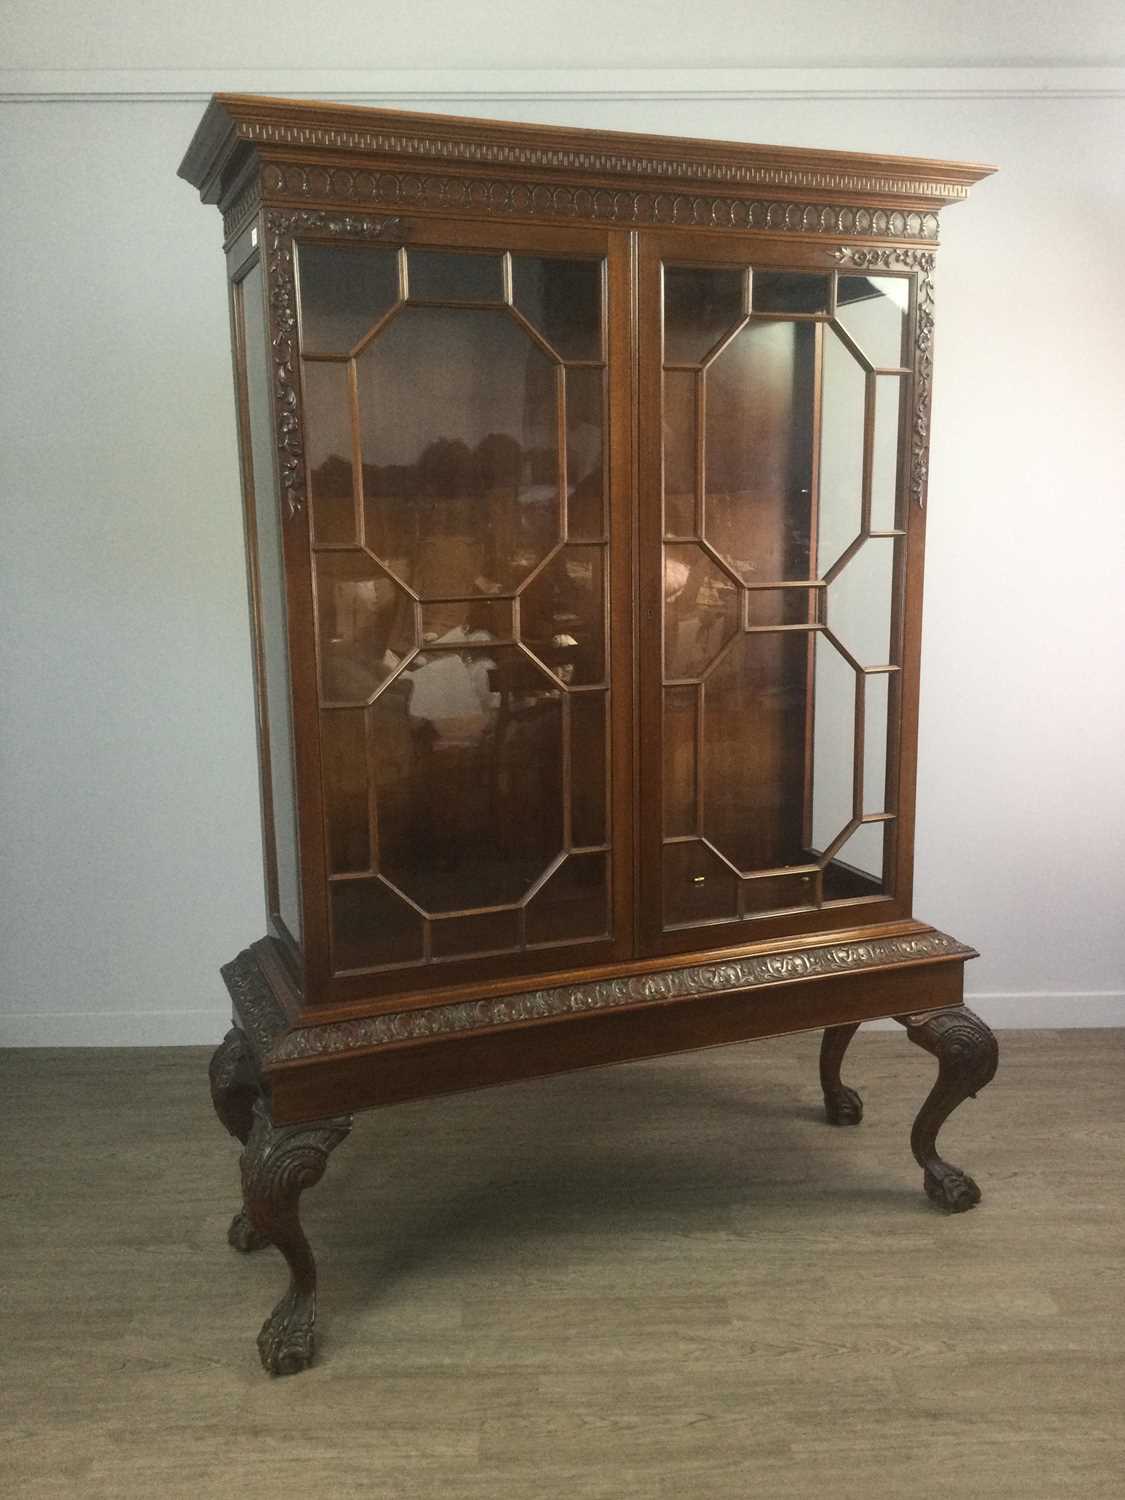 Lot 1416 - A MAHOGANY DISPLAY CABINET OF CHIPPENDALE DESIGN